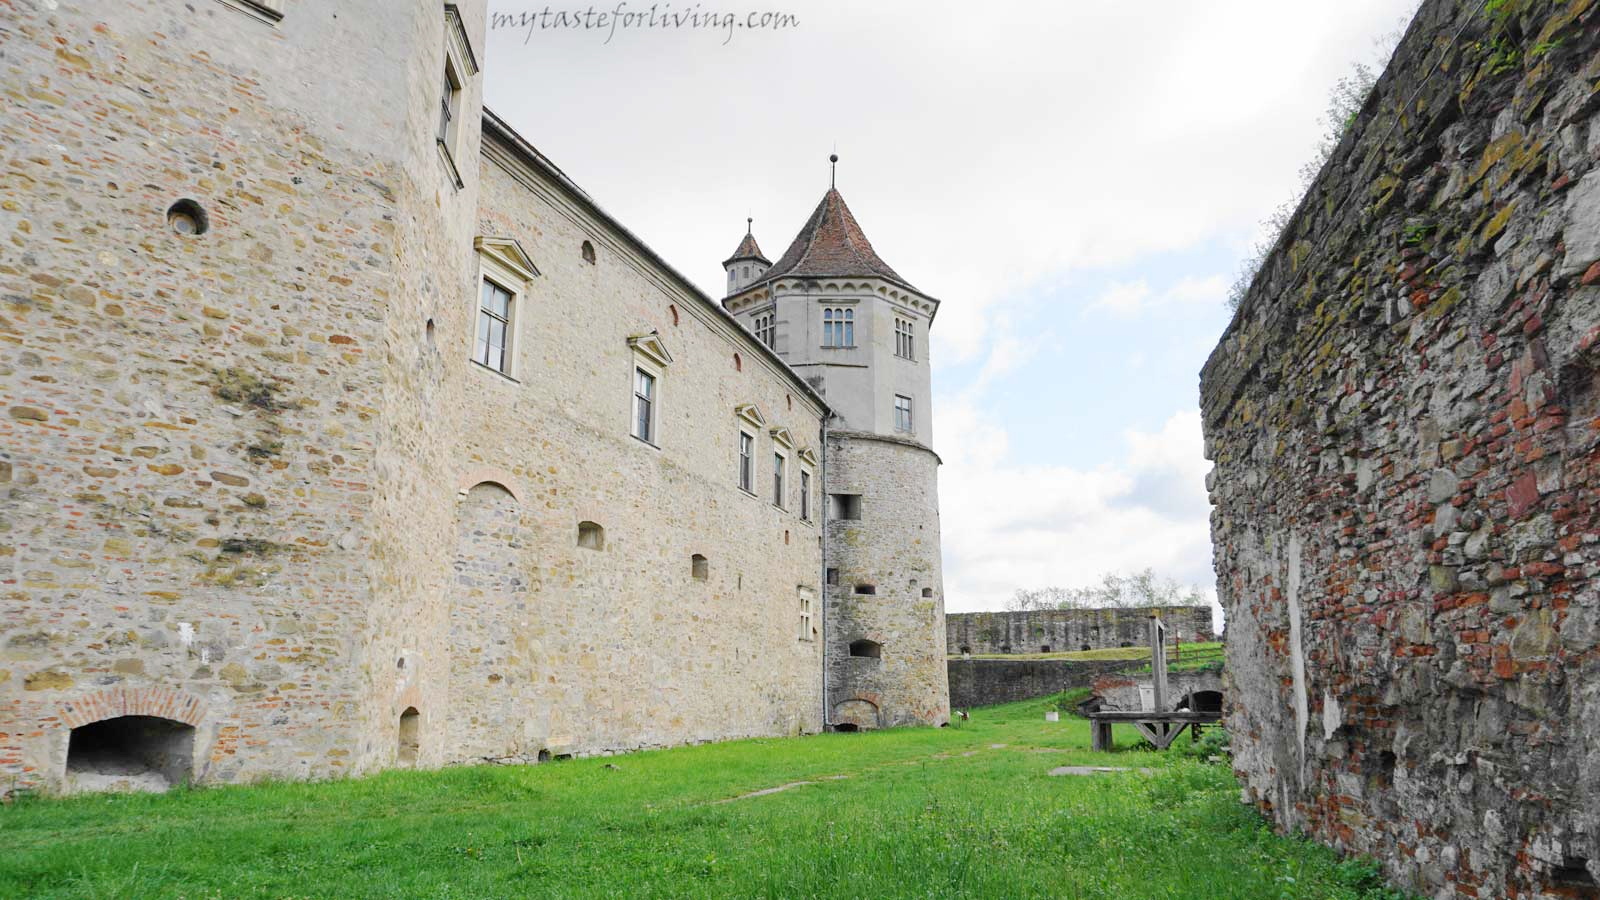 The beautifully preserved fortress of Fagaras is located in the town of Fagaras, located between the towns of Sibiu and Brasov in the romanian region of Transylvania.